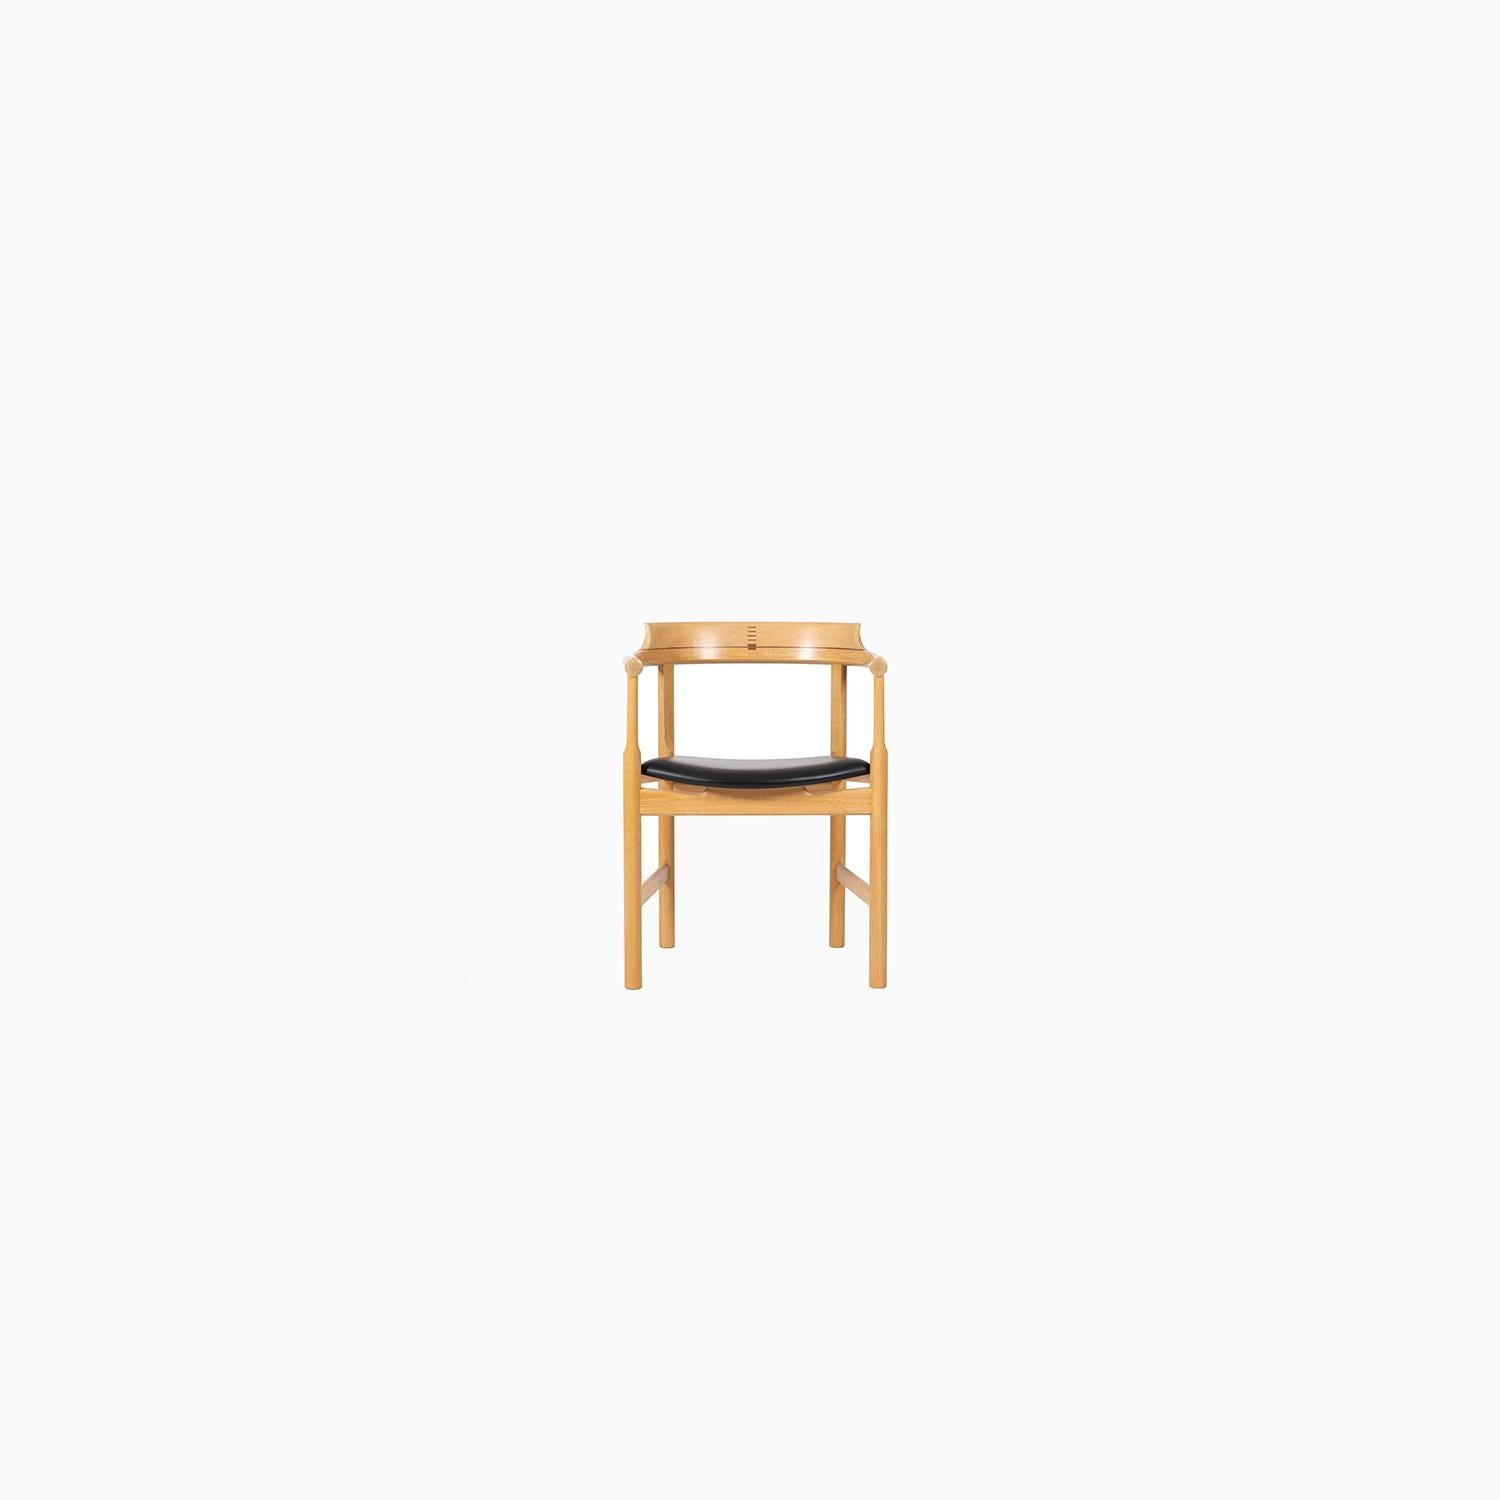 “Captains Chair” designed by Hans Wegner. Model PP52 produced by PP Mobler. A newer production made of lacquered oak and wenge with a black leather upholstered seat. Circa 2001.

Professional, skilled furniture restoration is an integral part of